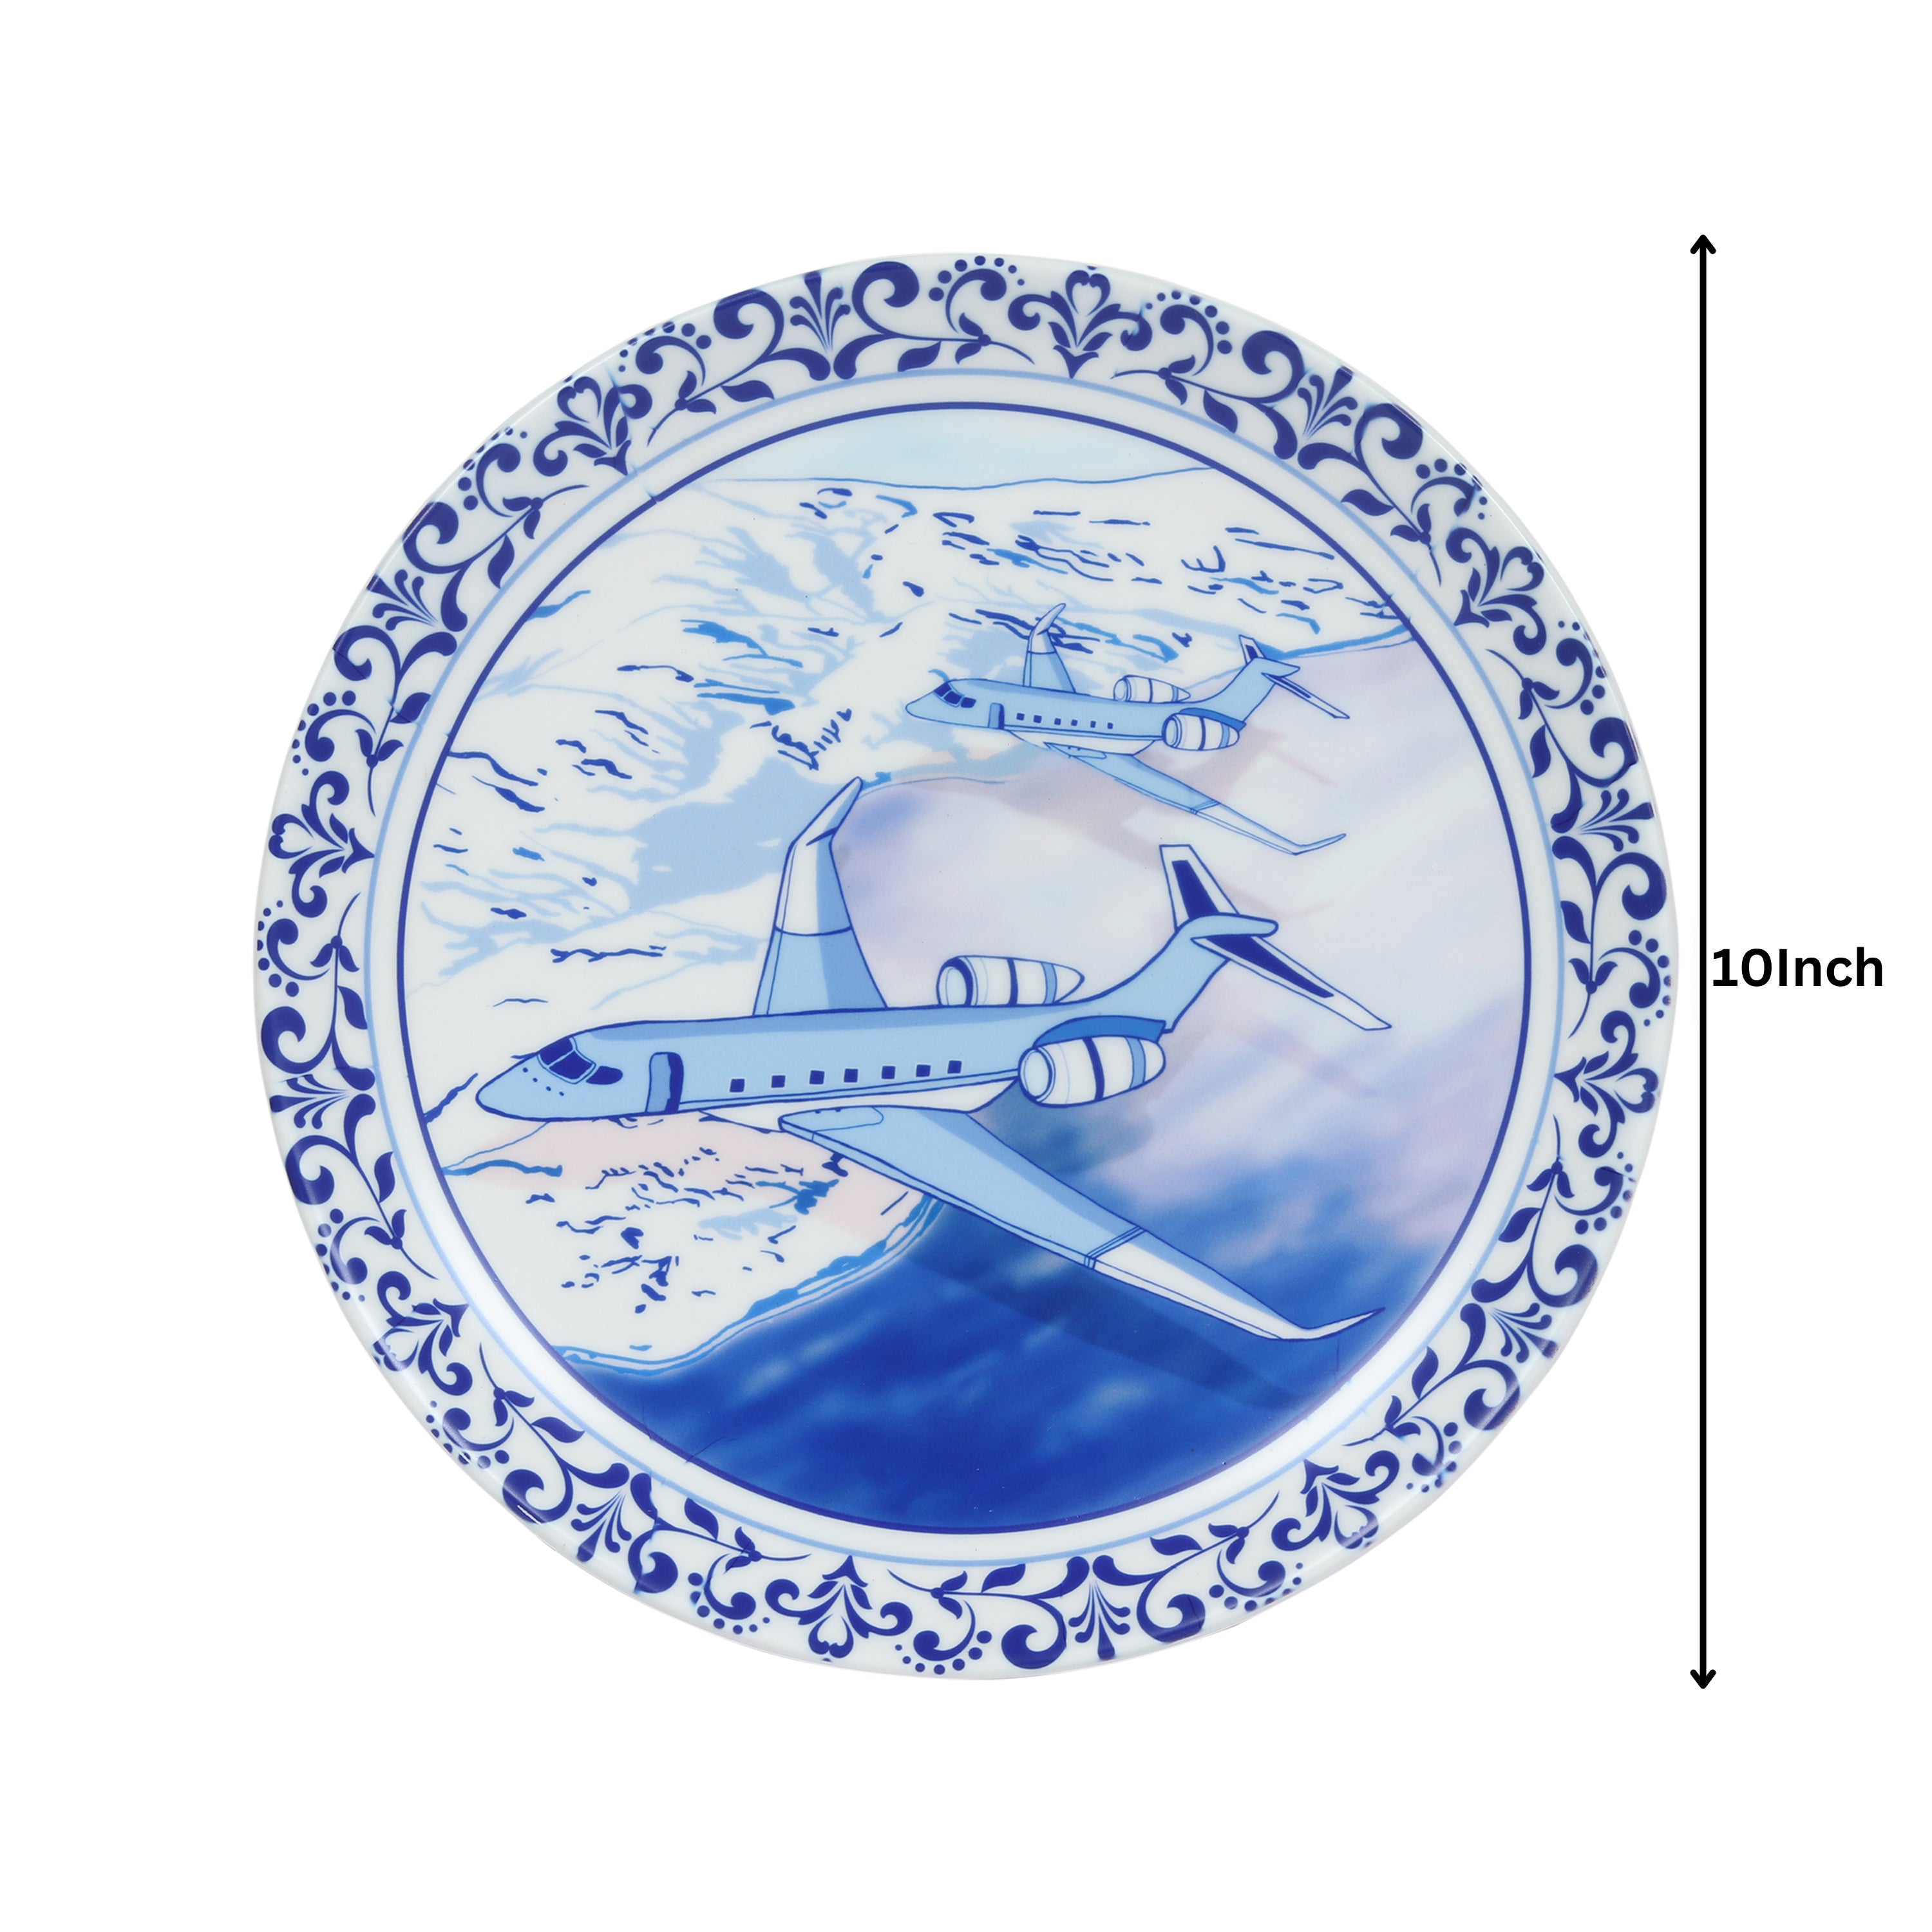 Decorative Wall Plates - Vintage Airplane Blue Pottery